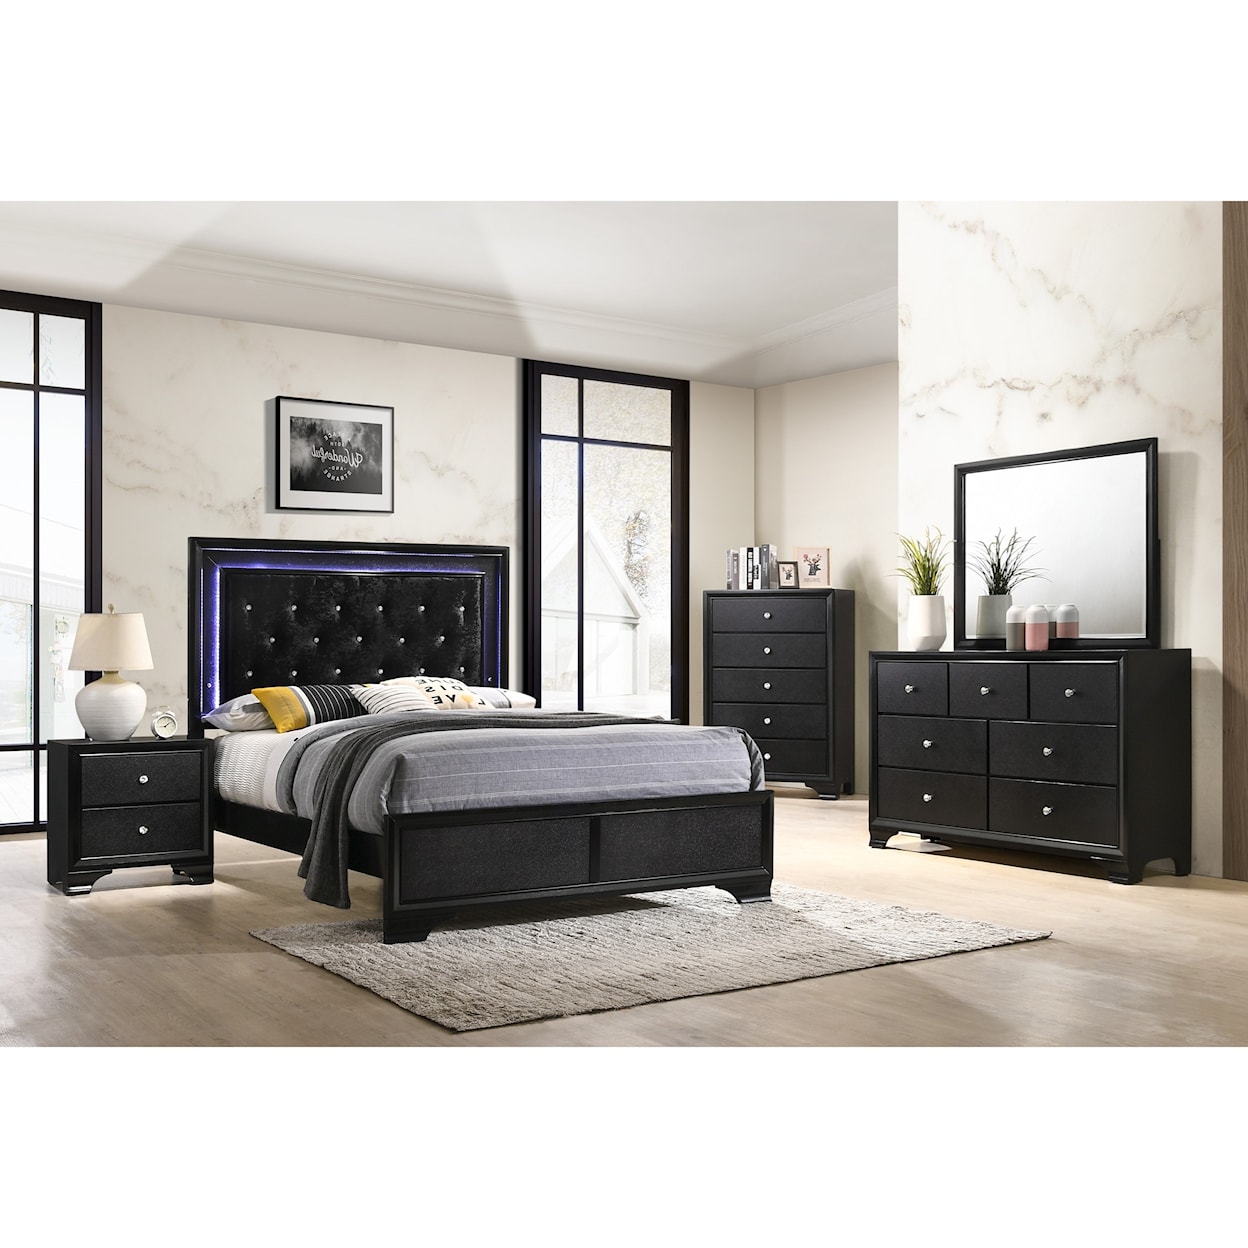 Crown Mark Micah Twin Upholstered Bed